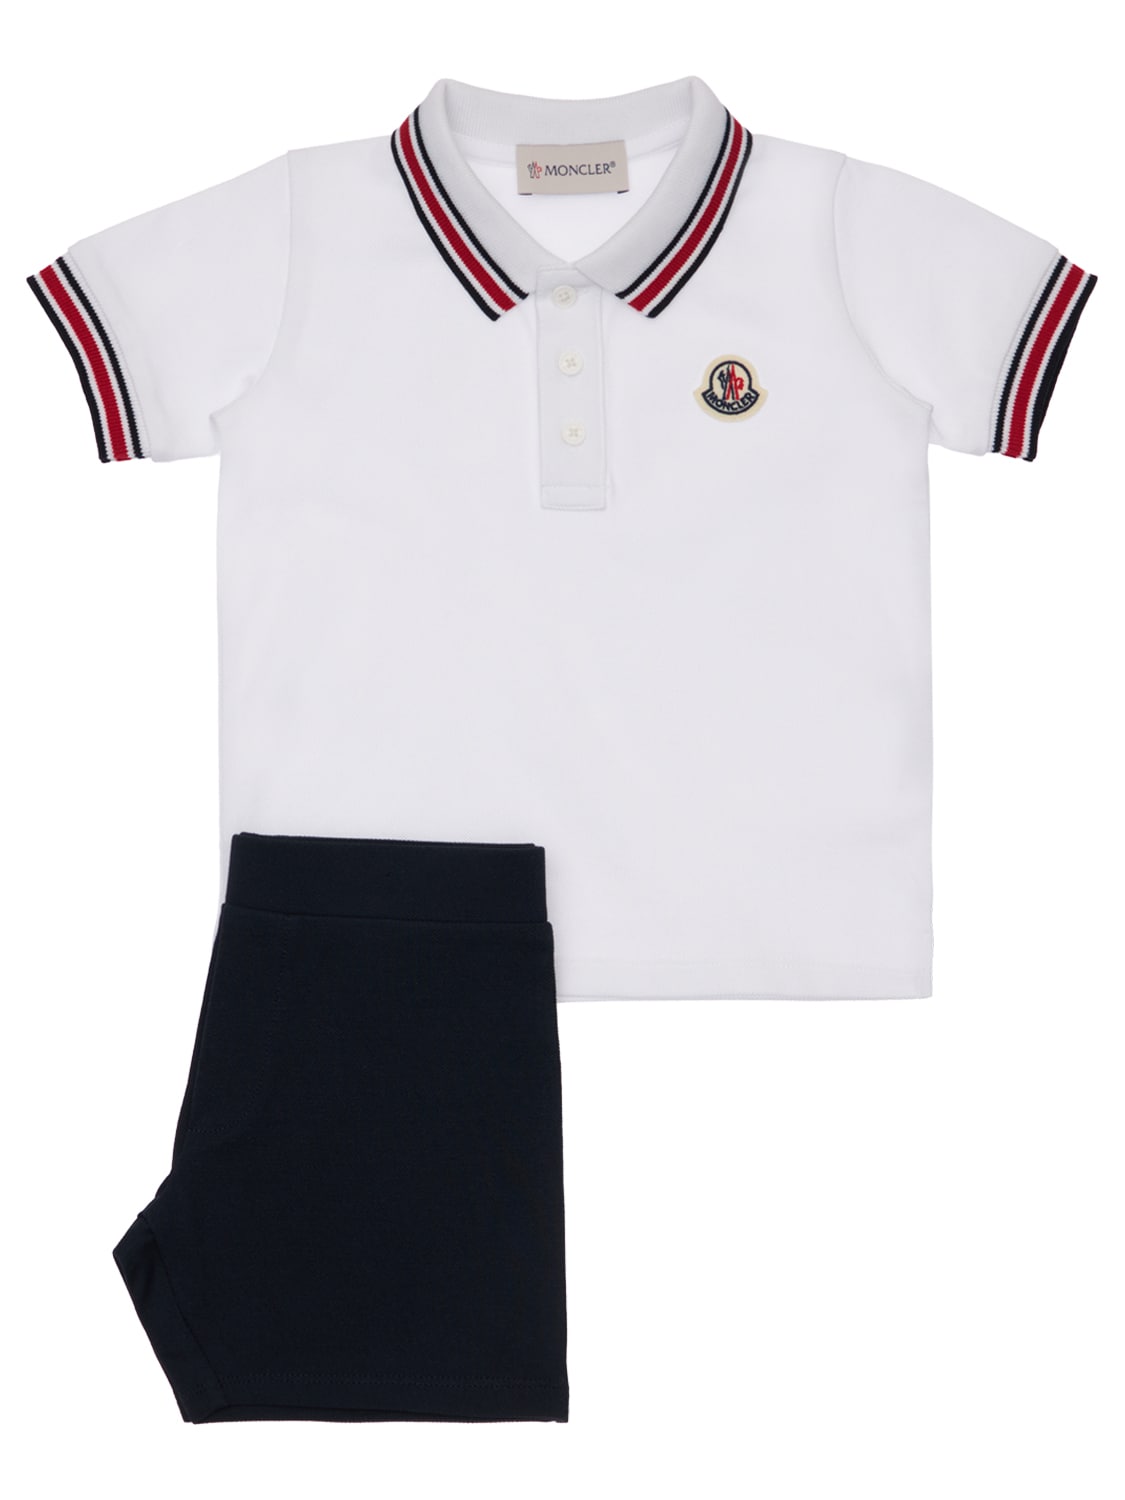 MONCLER COTTON JERSEY T-SHIRT & PANTS,73IFGR034-MDAY0